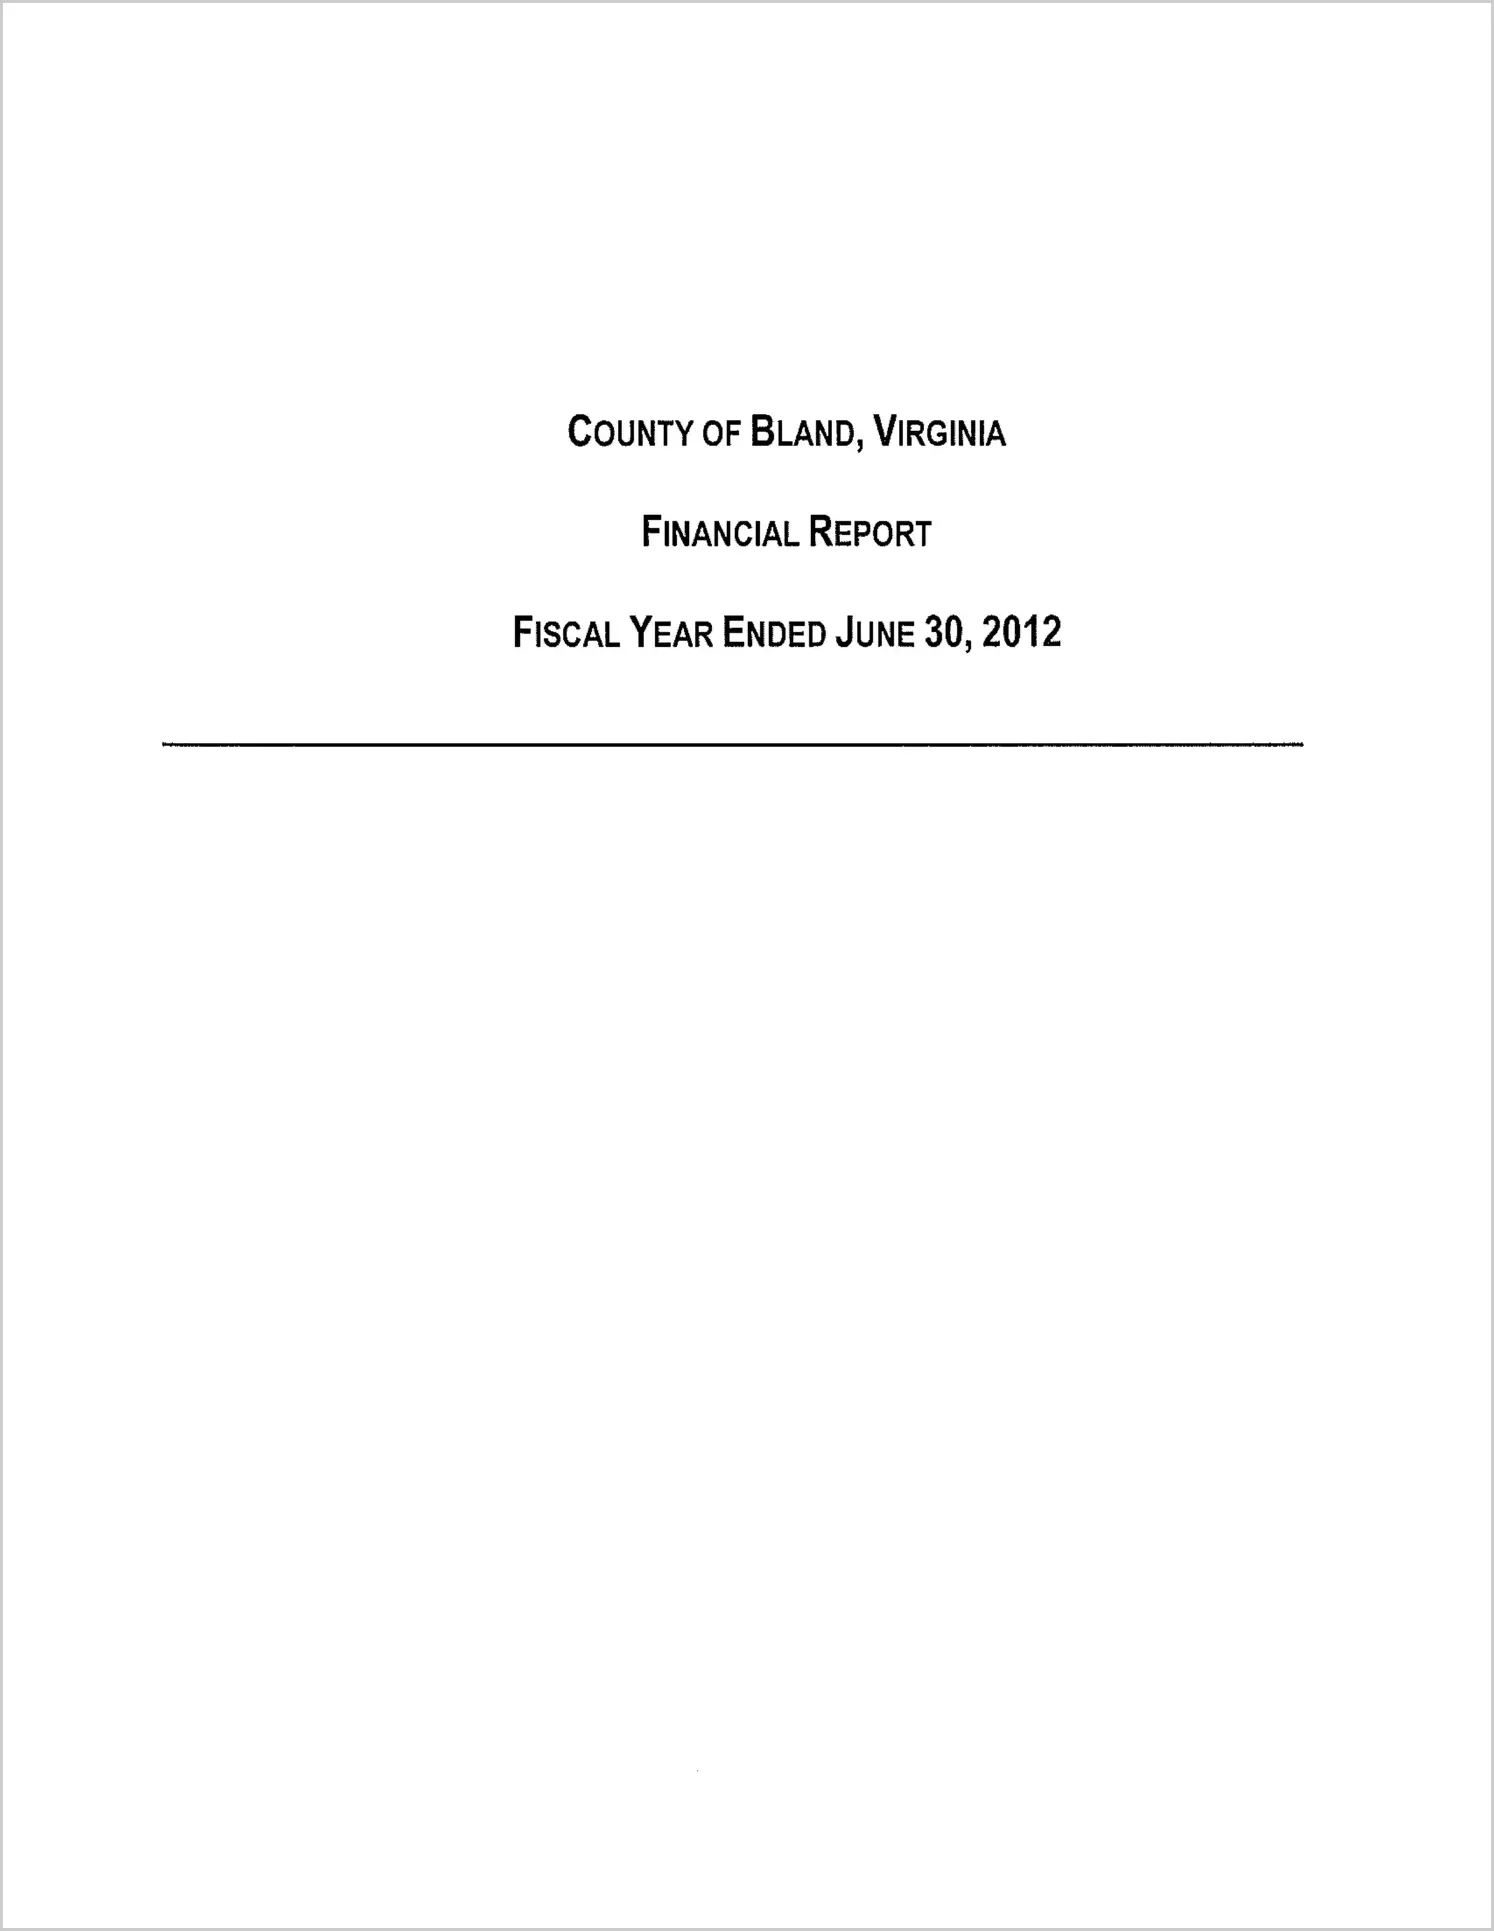 2012 Annual Financial Report for County of Bland